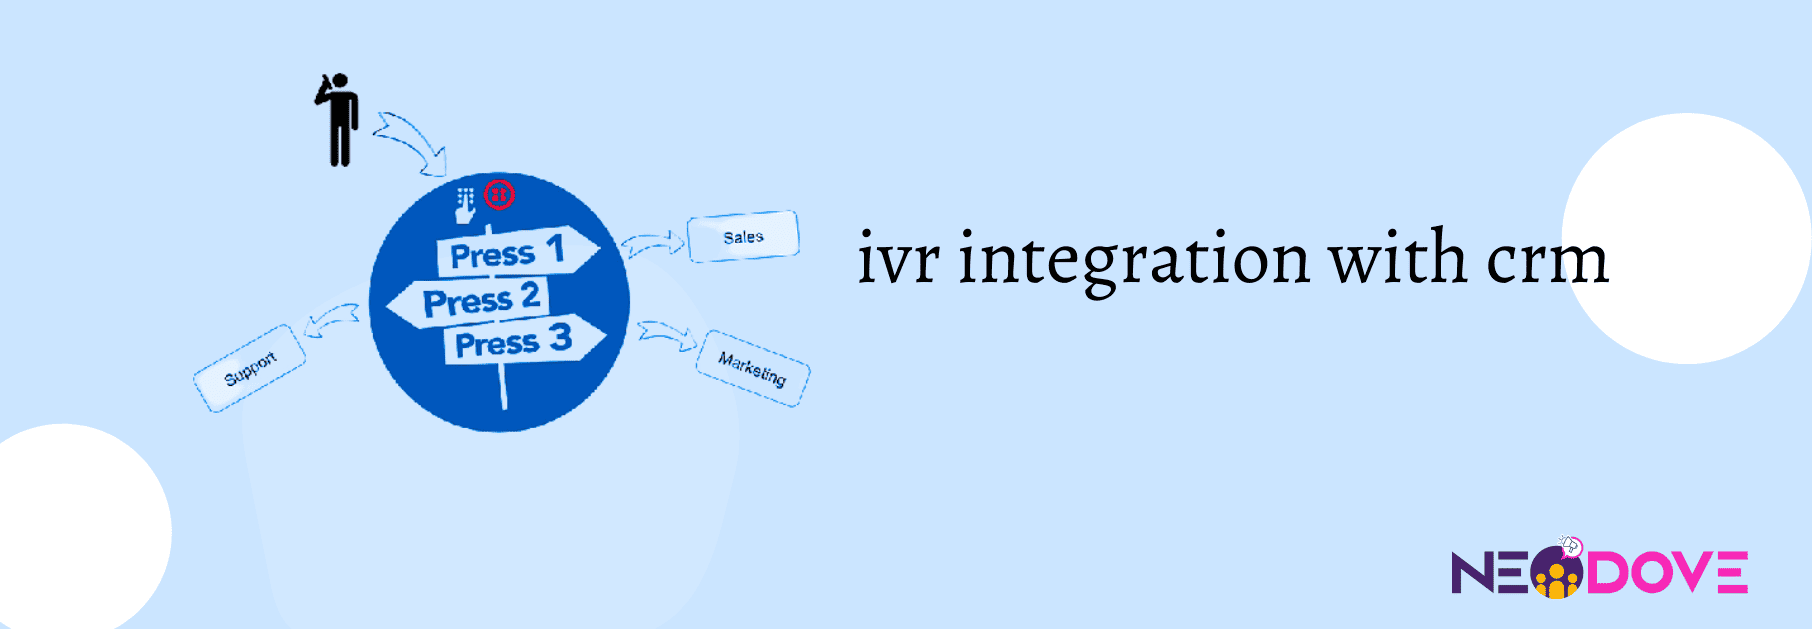 ivr integration with crm